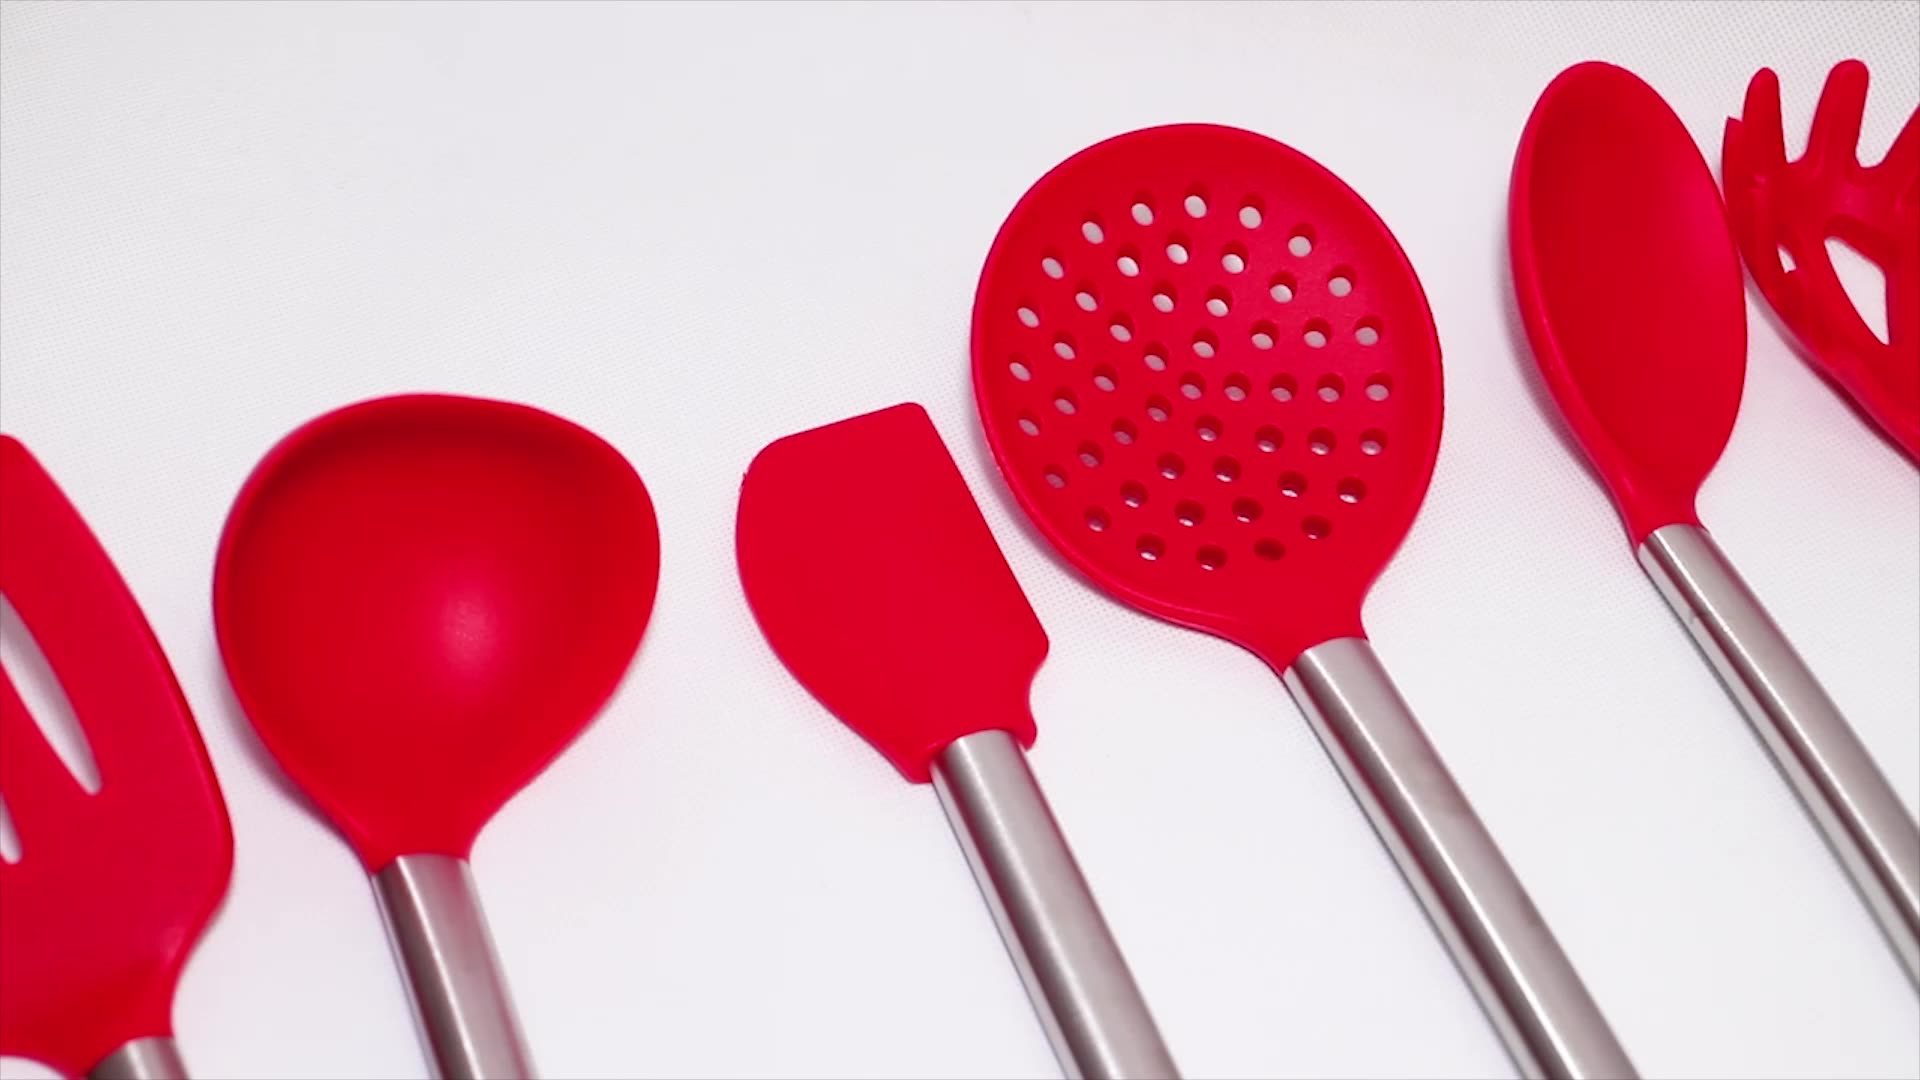 9 pieces red heat resistant professional silicone kitchen utensil for cooking